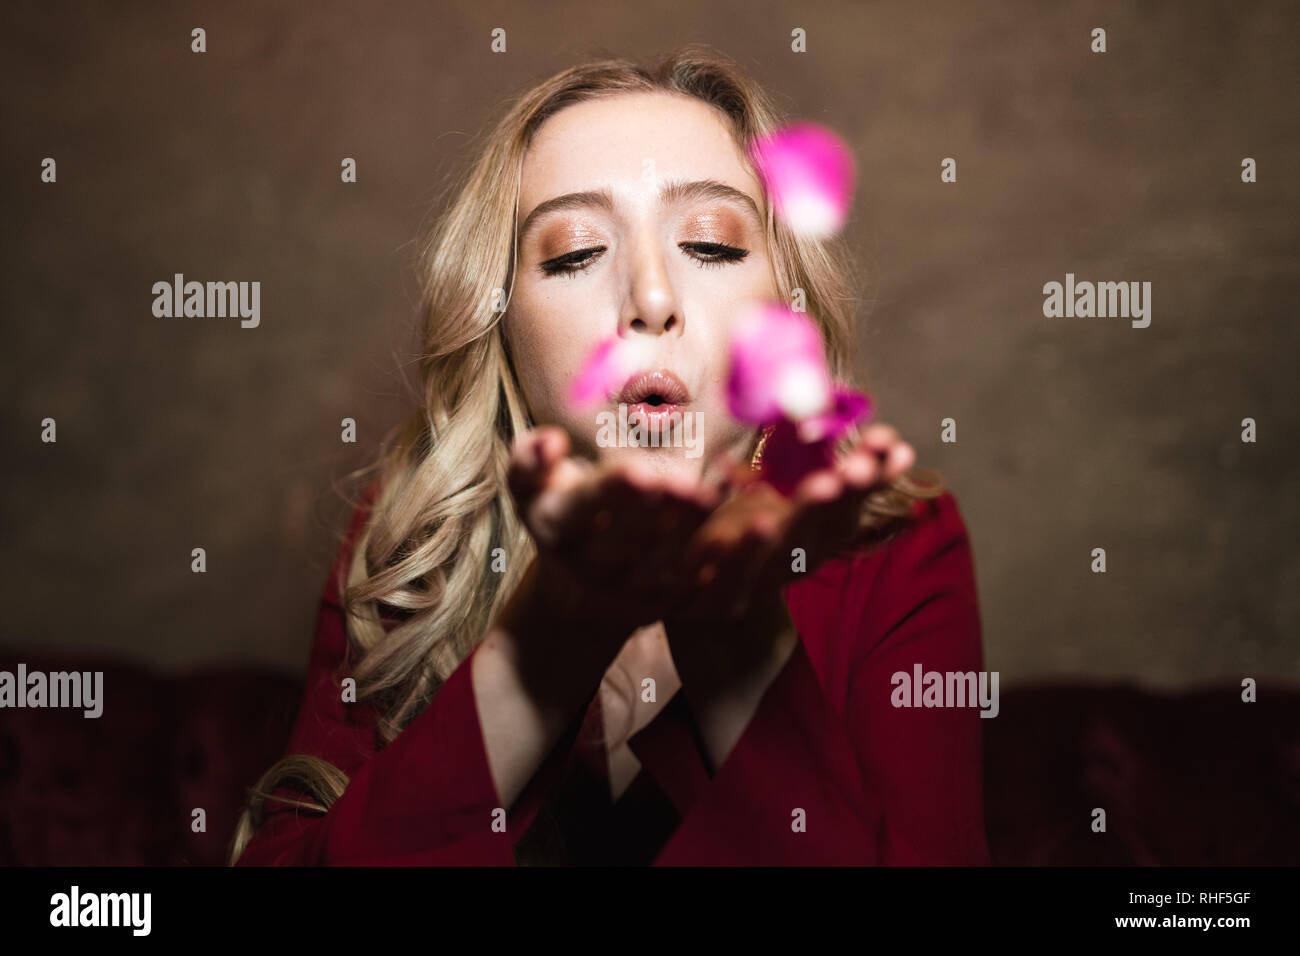 A young blonde woman blowing a kiss of pink rose petals towards the camera Stock Photo